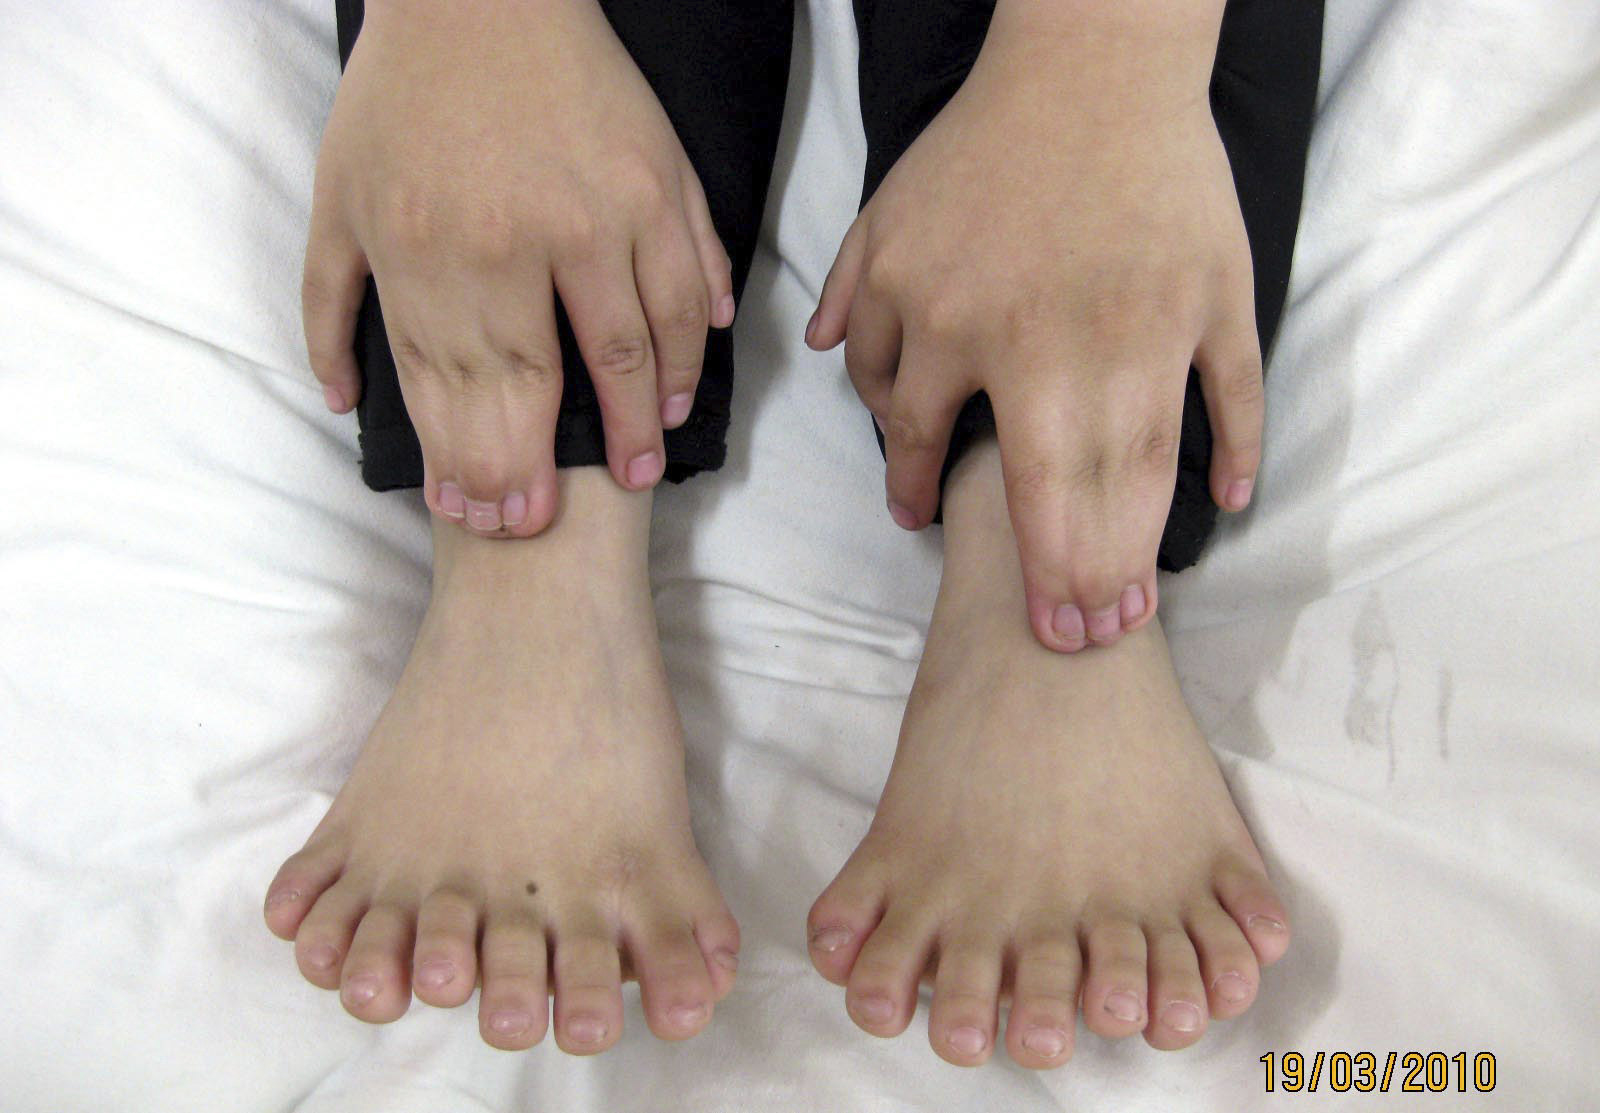 6-year-old Li Jinpeng has 15 fingers and 16 toes